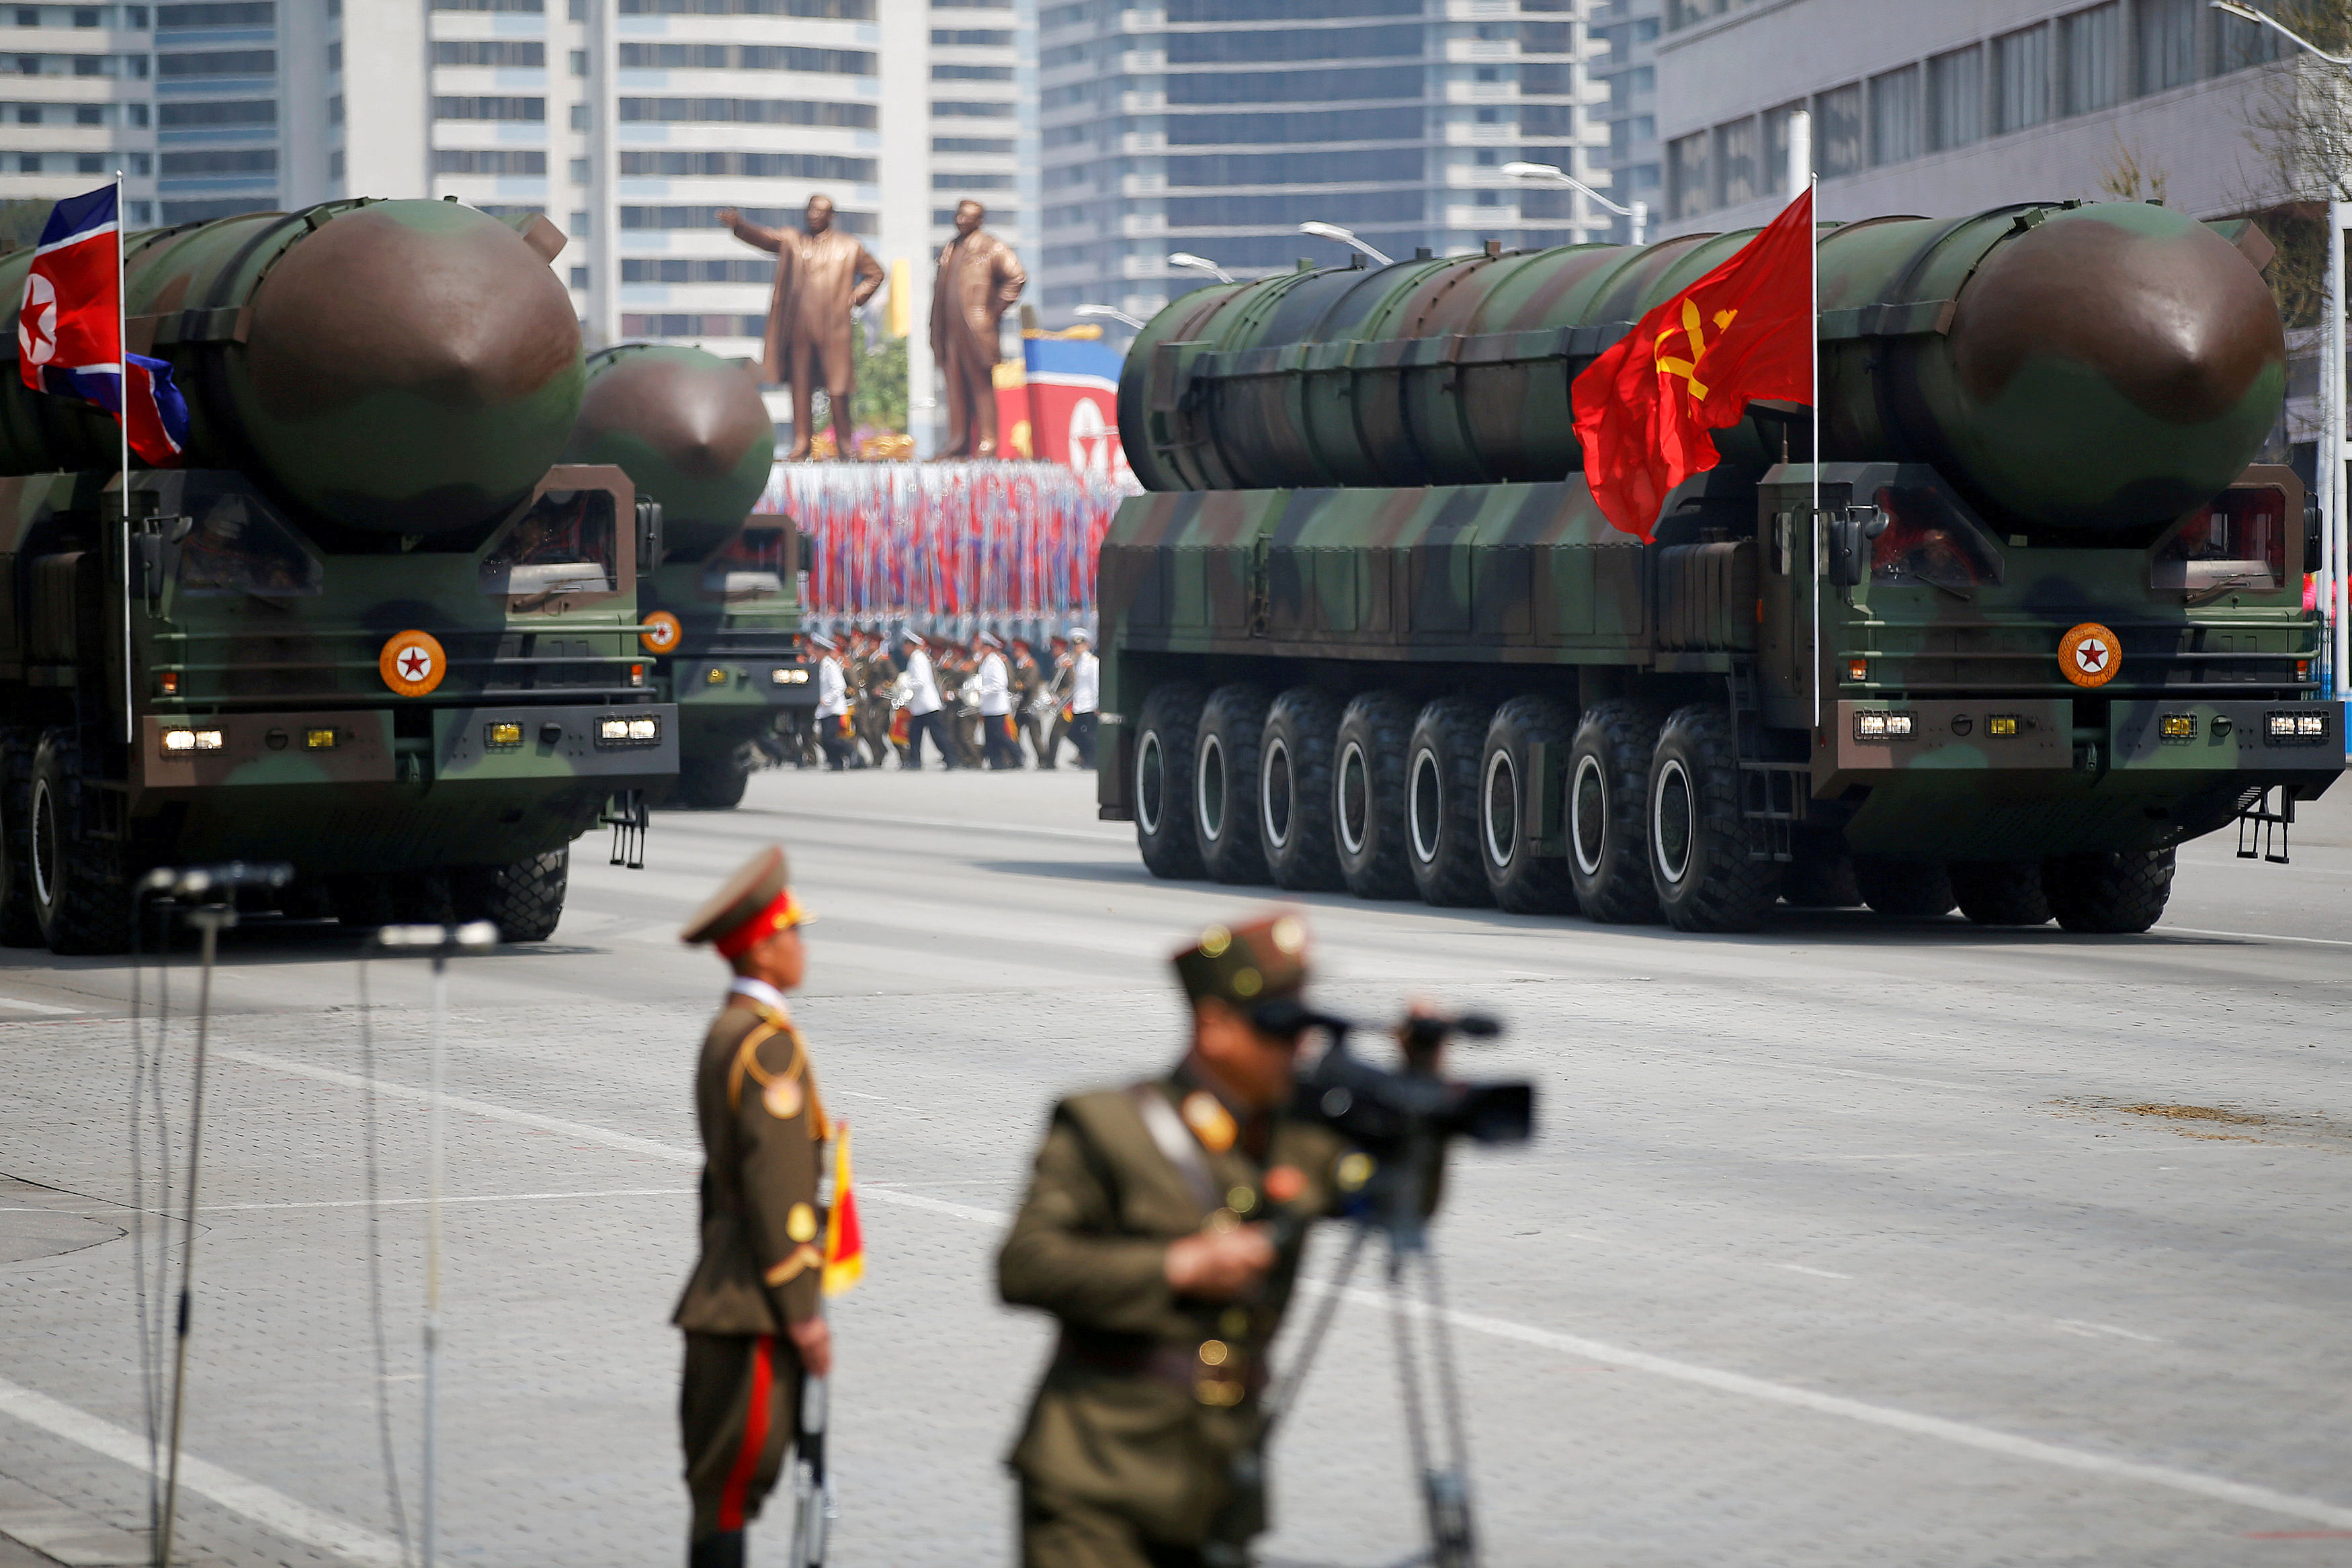 FILE PHOTO: Intercontinental ballistic missiles (ICBM) are driven past the stand with North Korean leader Kim Jong Un and other high ranking officials during a military parade marking the 105th birth anniversary of country's founding father Kim Il Sung, in Pyongyang April 15, 2017. (Reuters)